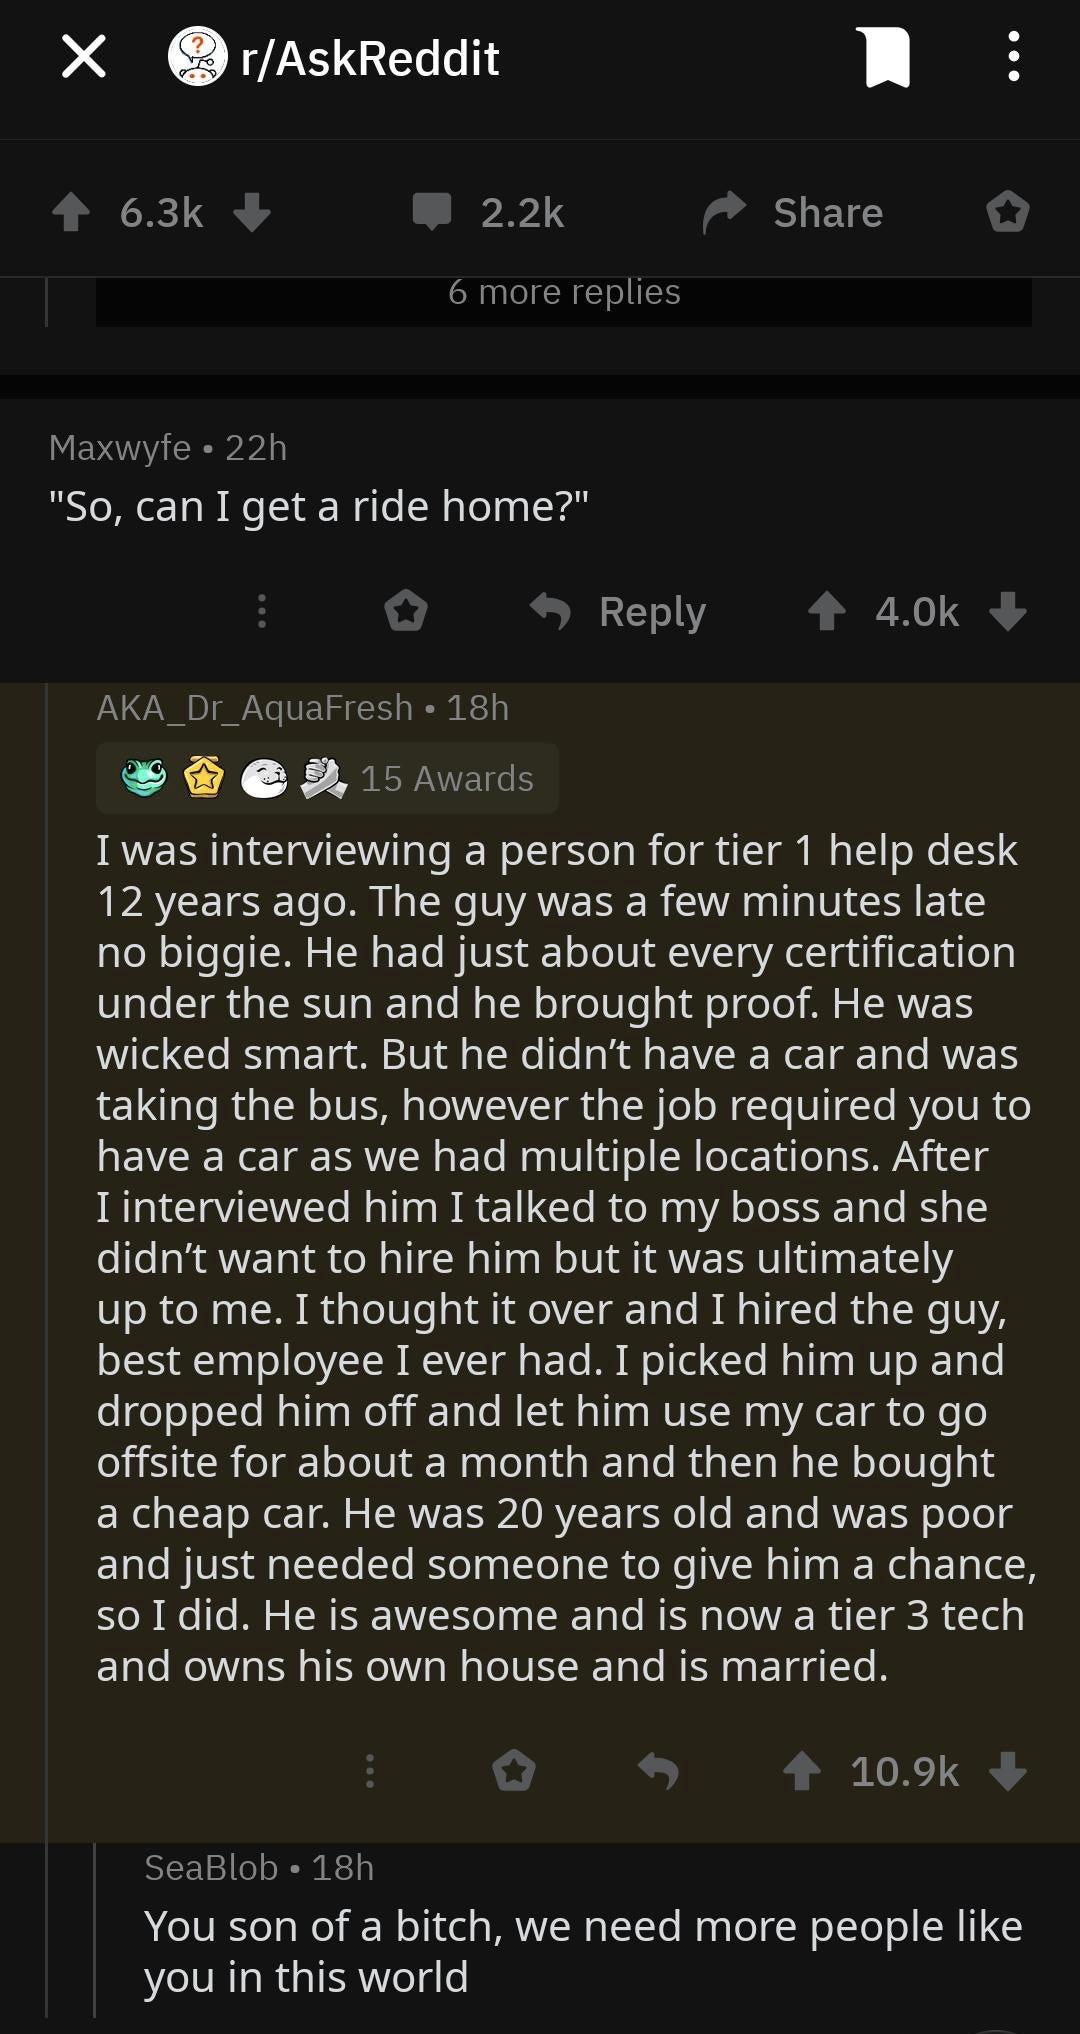 screenshot - X rAskReddit o 6 more replies Maxwyfe 22h "So, can I get a ride home?" 3 AKA_Dr_AquaFresh 18h og @. 15 Awards I was interviewing a person for tier 1 help desk 12 years ago. The guy was a few minutes late no biggie. He had just about every cer